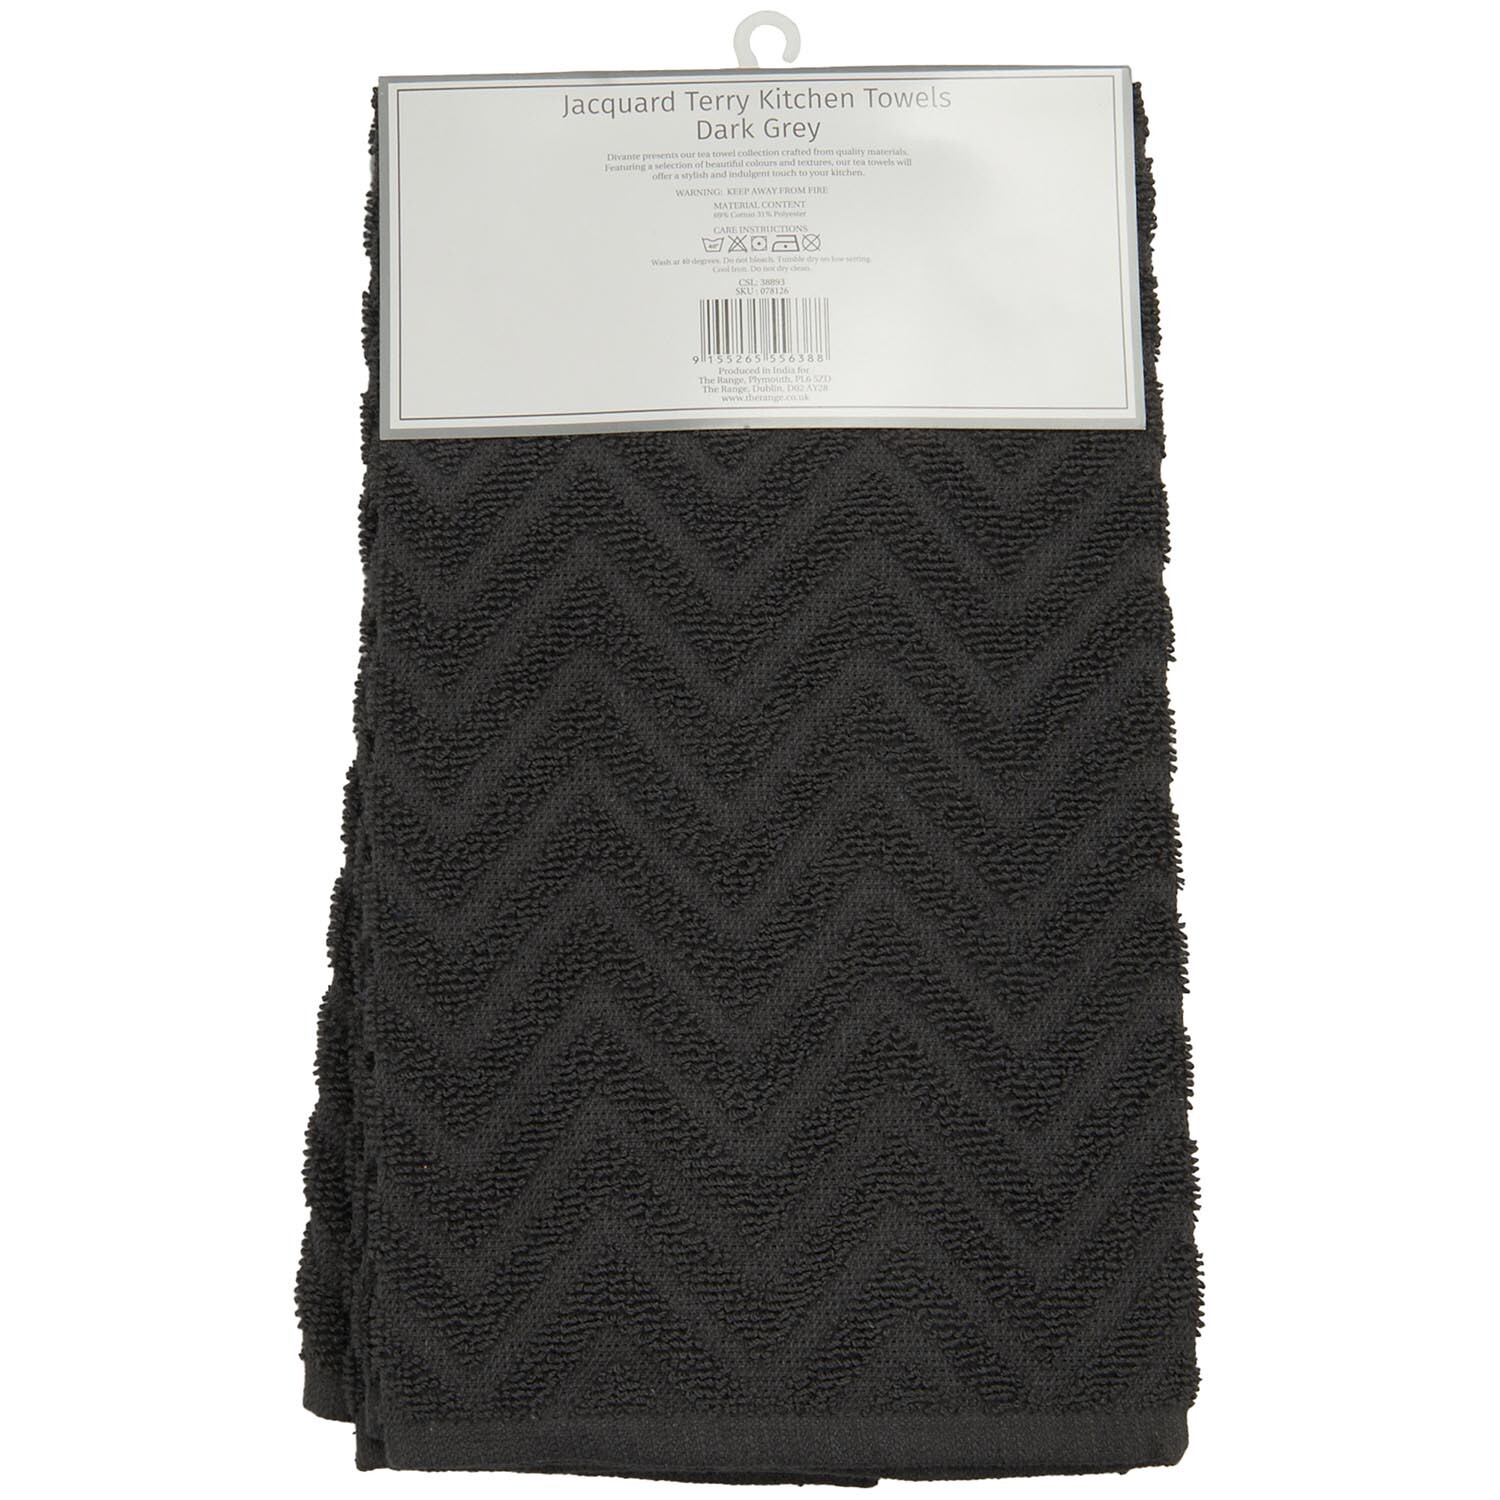 Pack of 2 Jacquard Terry Kitchen Towels - Dark Grey Image 2